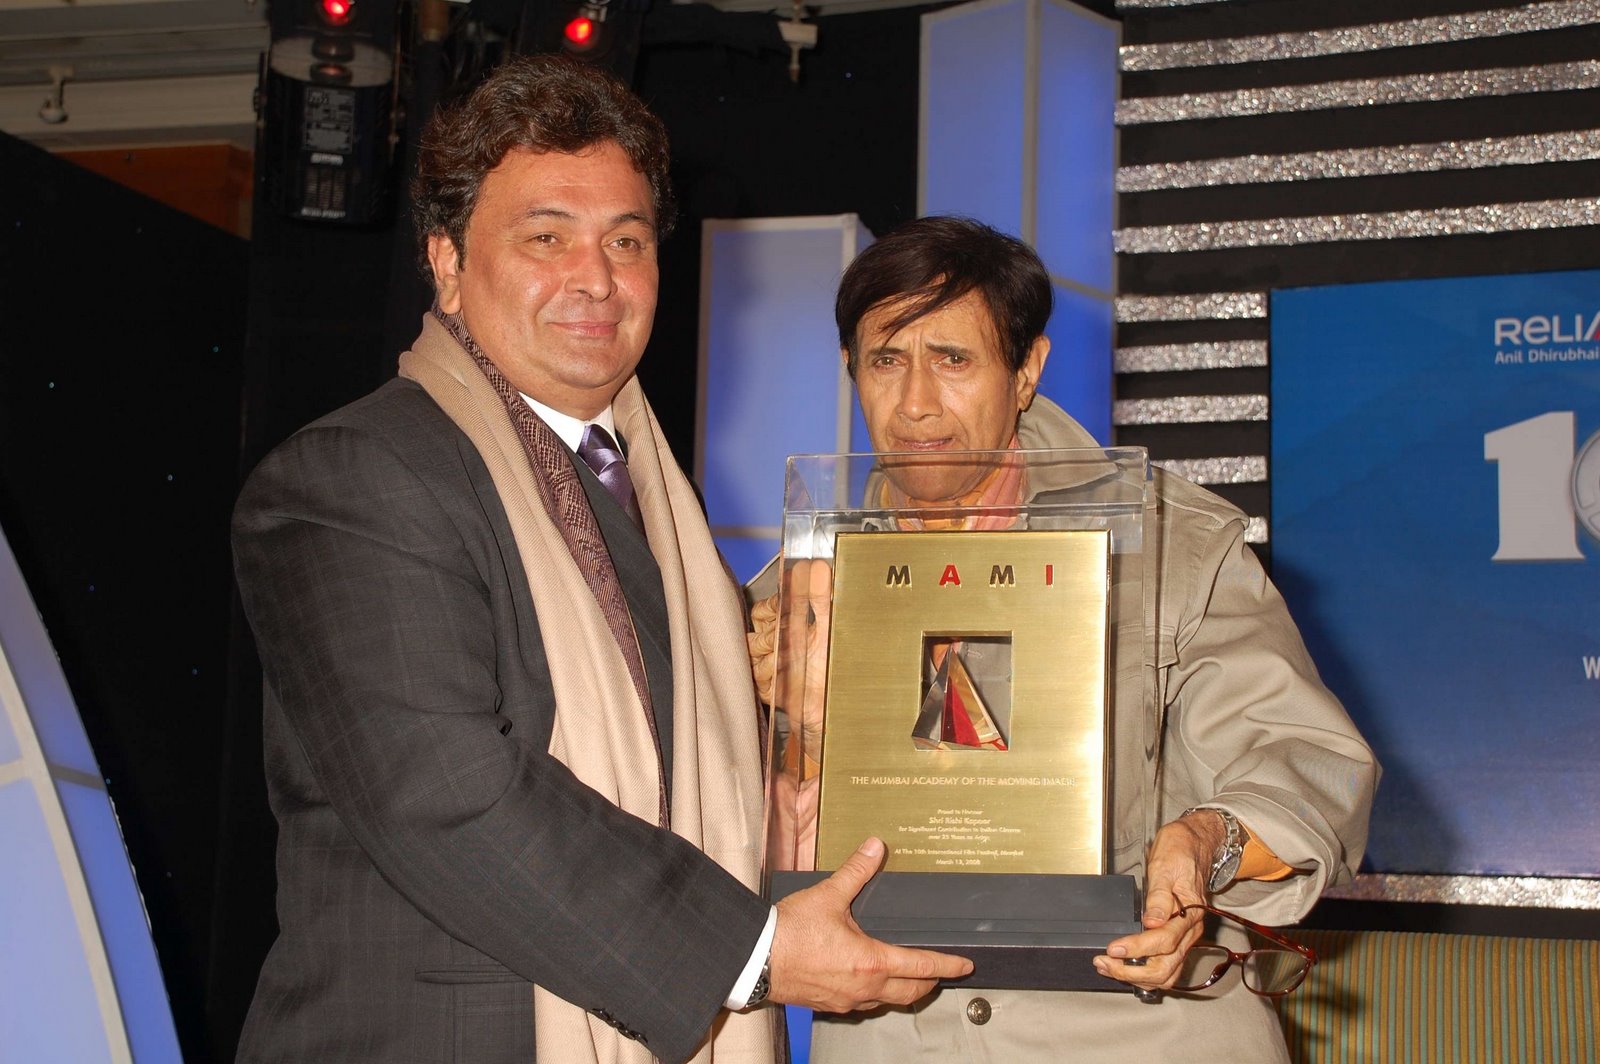 [Shri+Rishi+Kapoor+Felicitated+by+chief+guest+dev+anand+for+Significant+Contribution+to+Cinema+over+25+years.JPG]